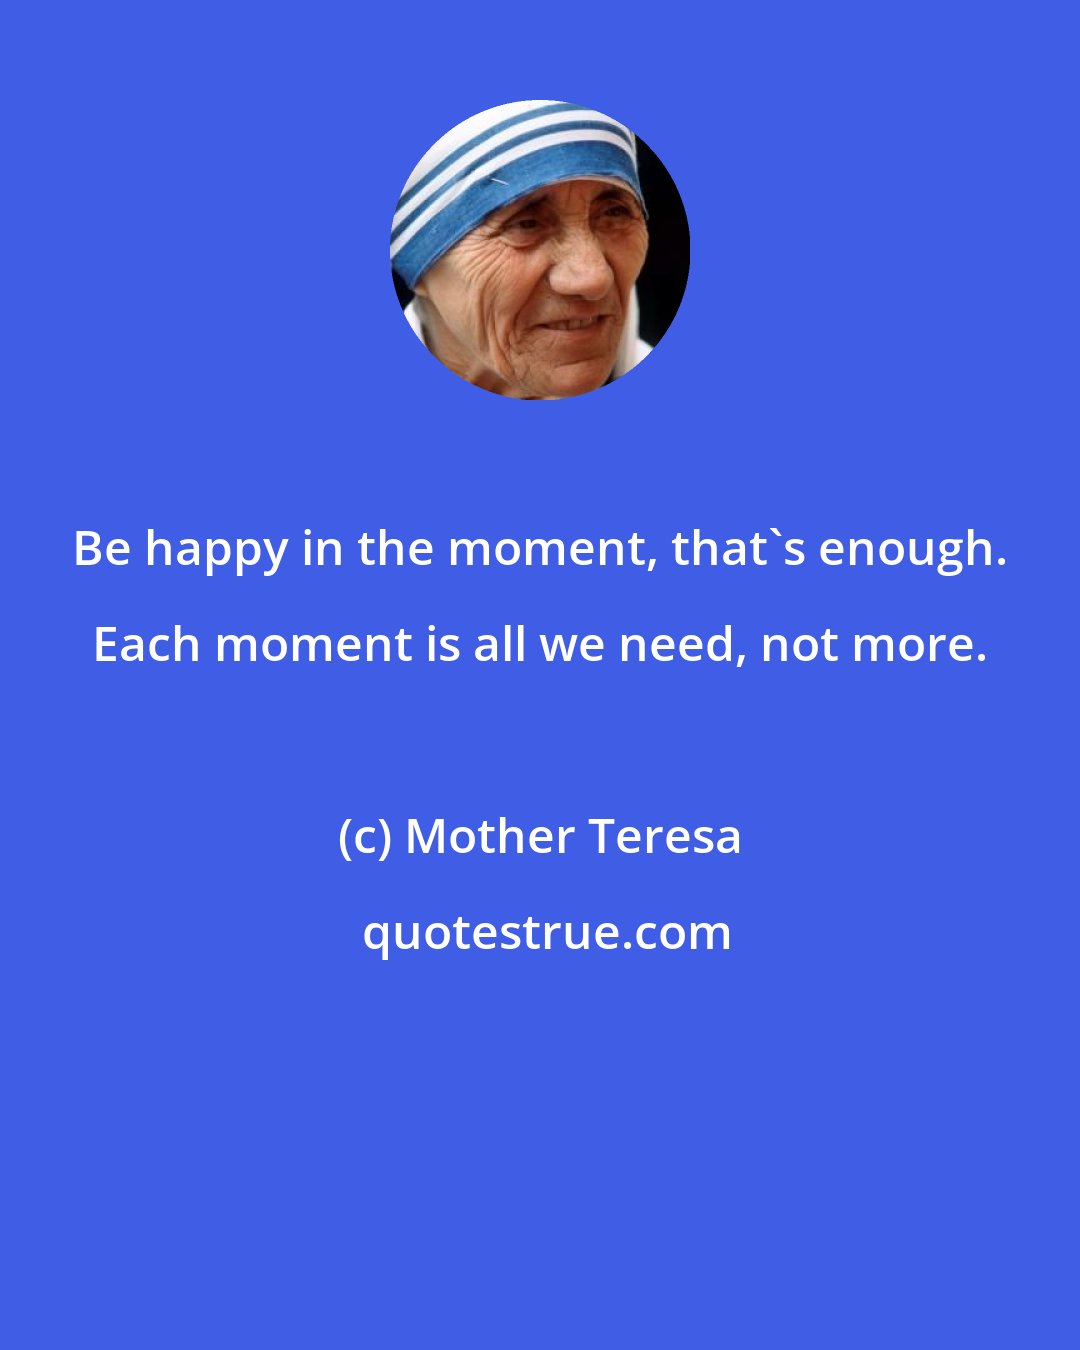 Mother Teresa: Be happy in the moment, that's enough. Each moment is all we need, not more.